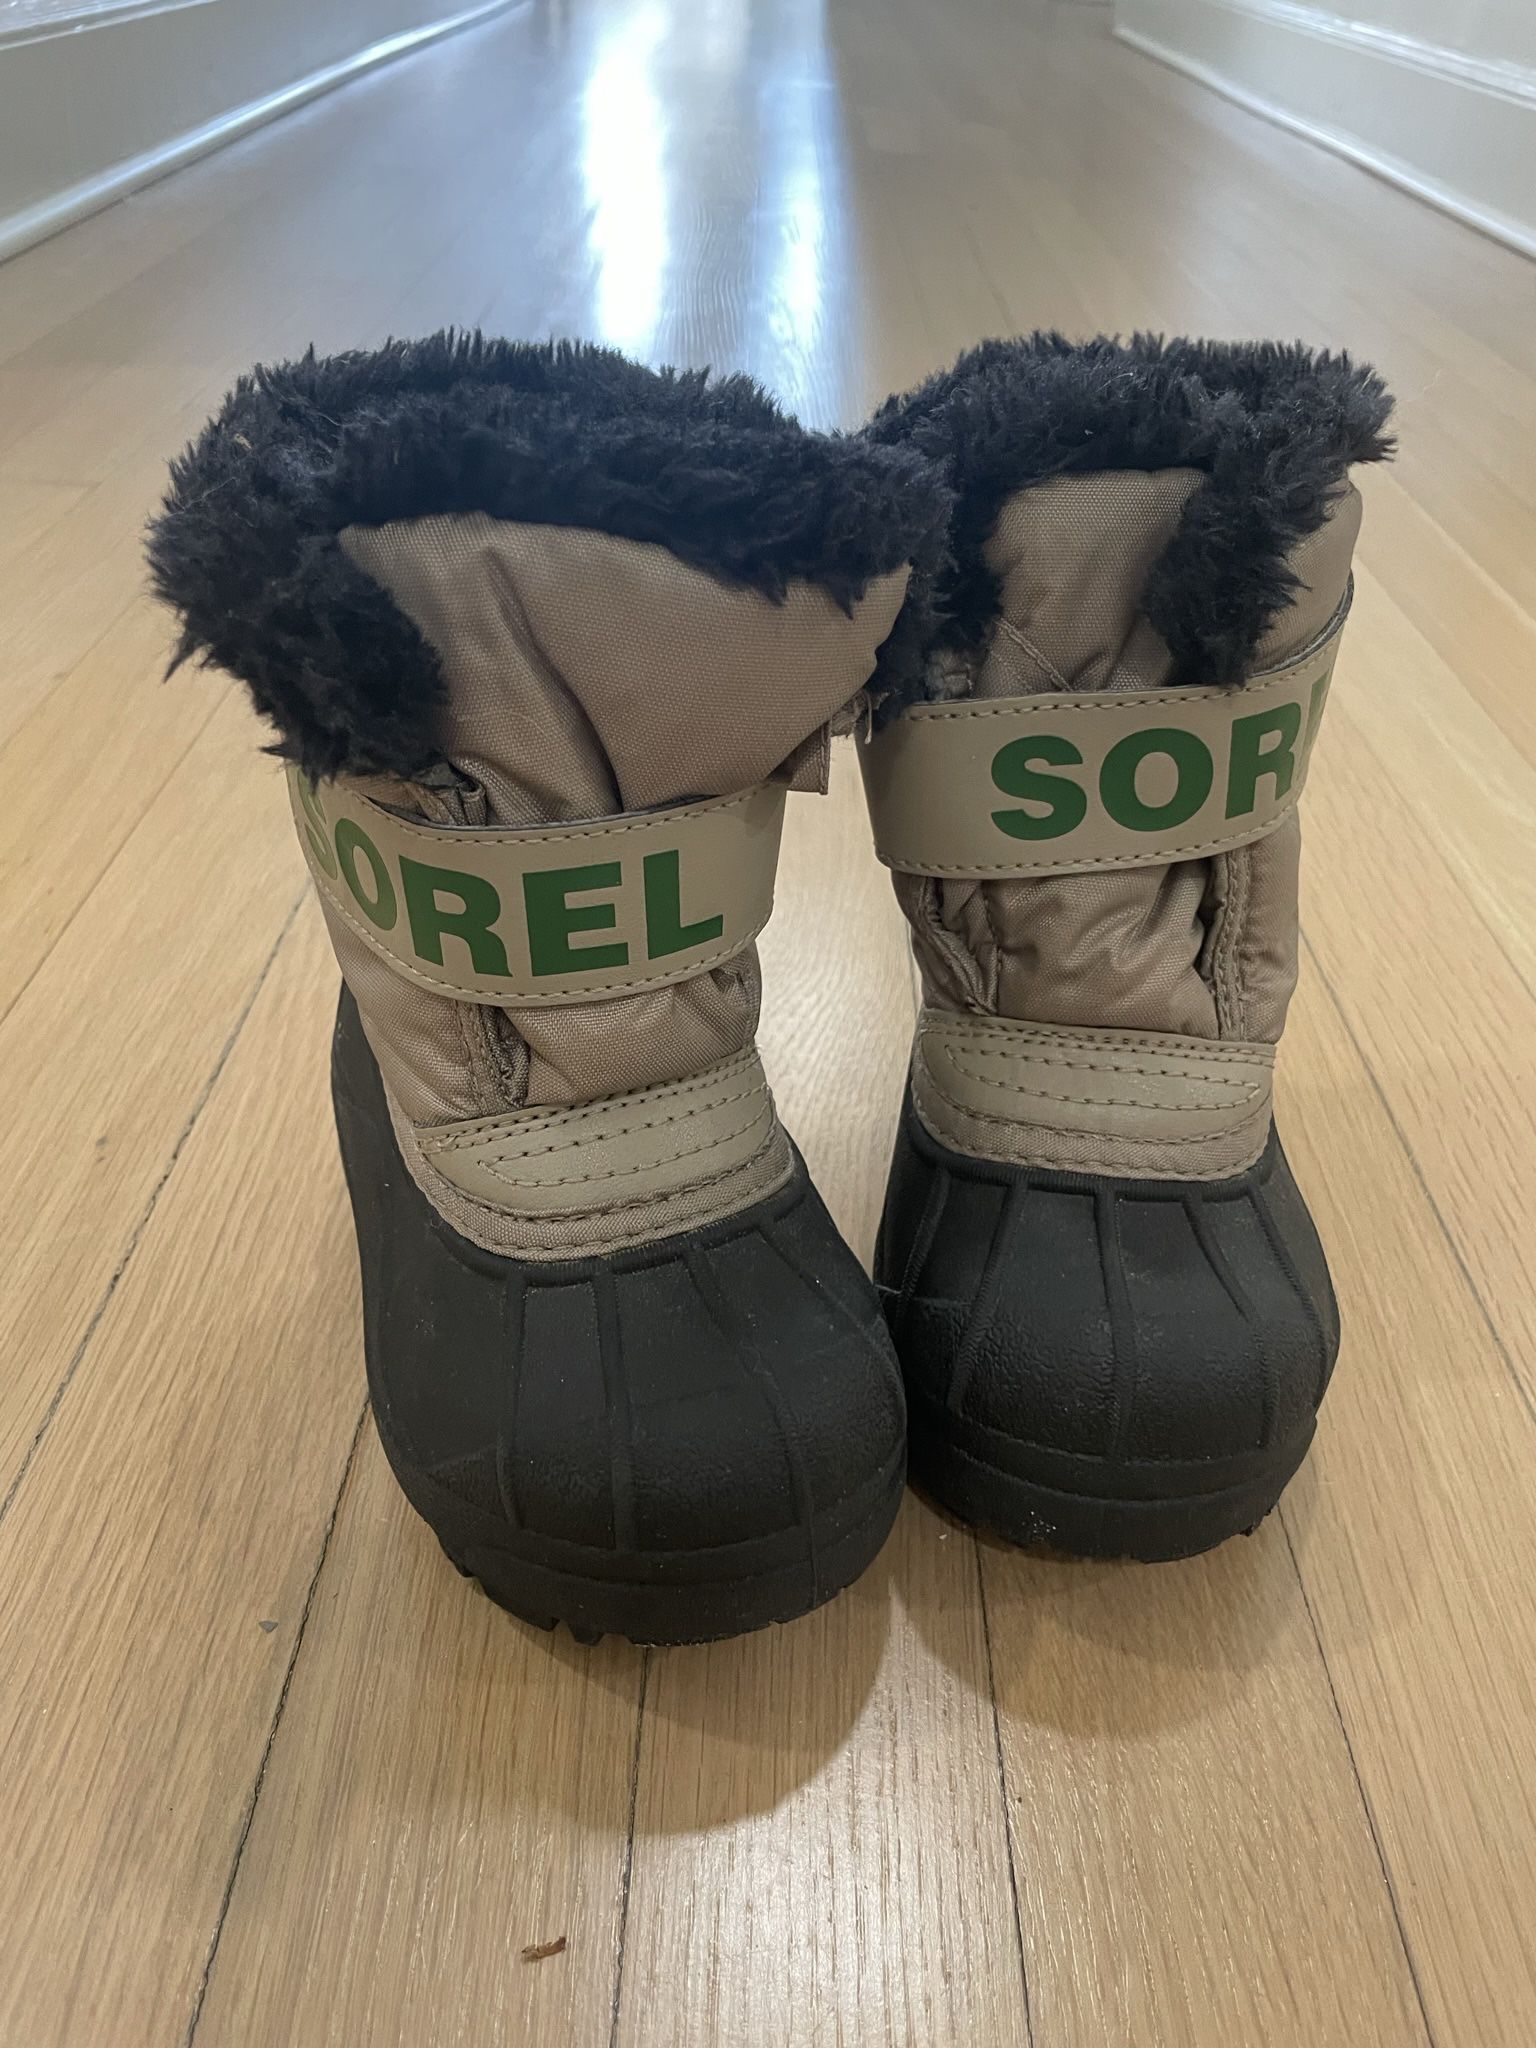 Sorel Winter Boots - Toddler Size 7 - Lightly Used